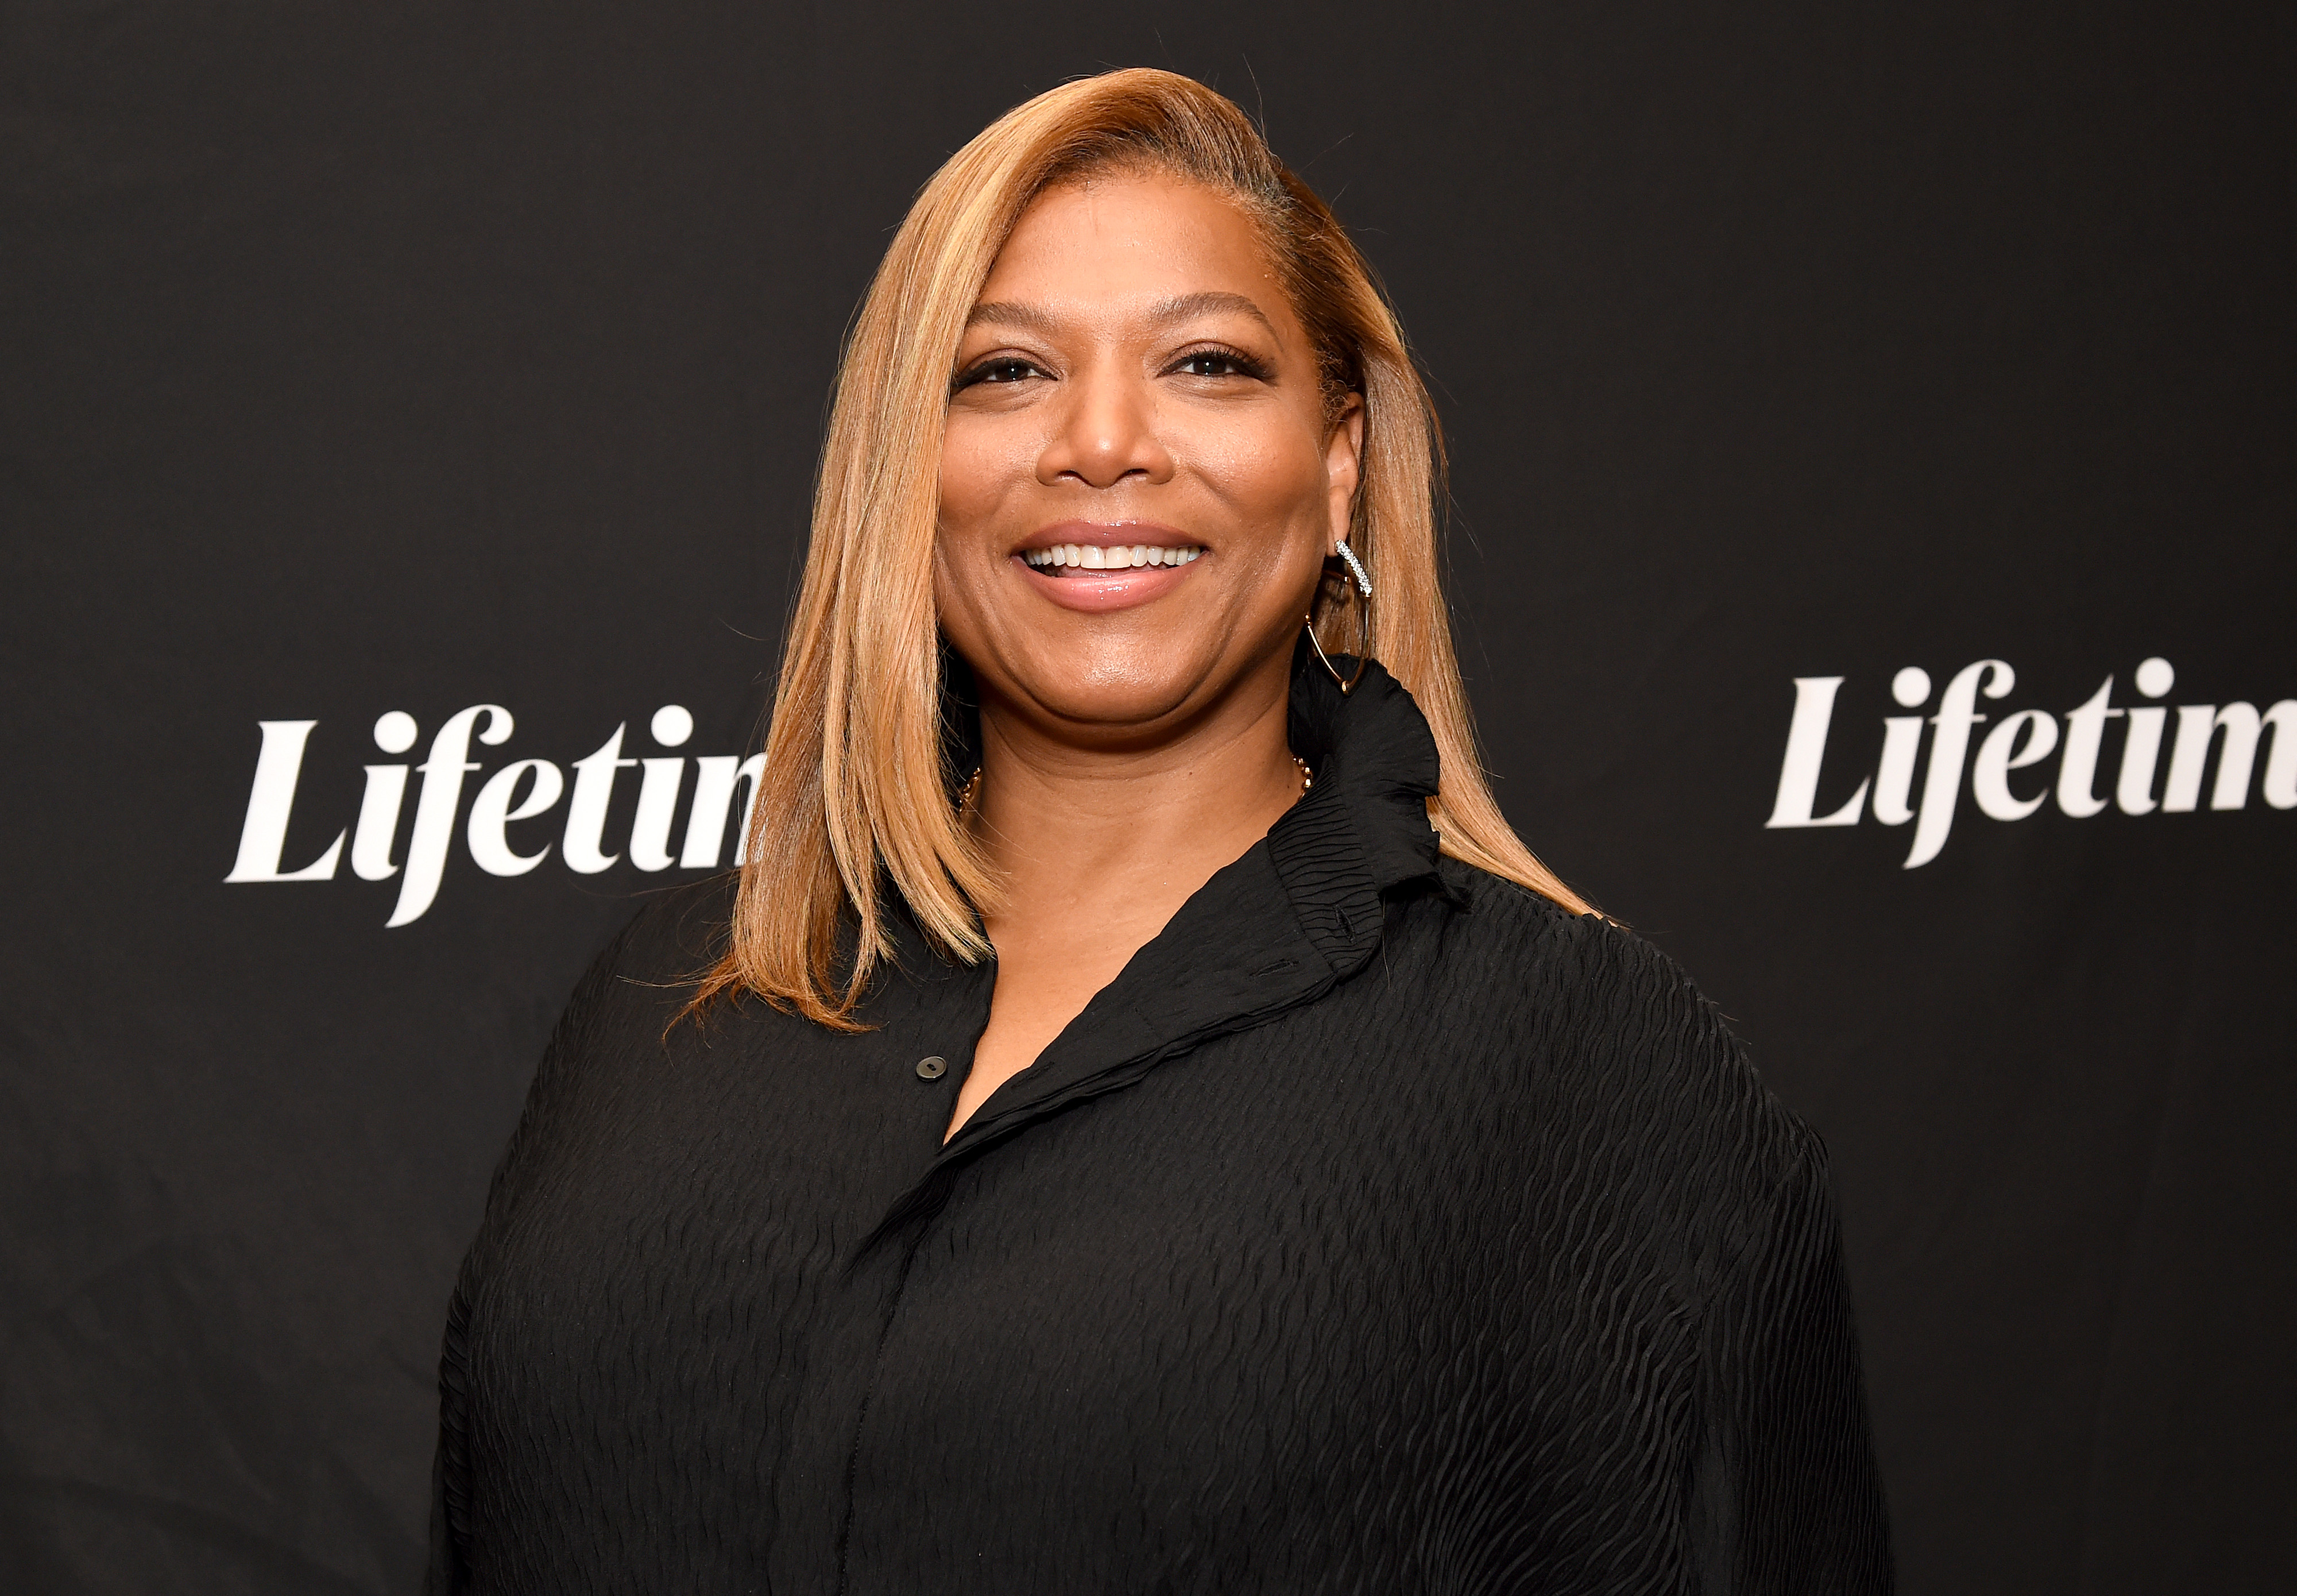 Queen Latifah Explains How She Got Her Royal Name and Why Women